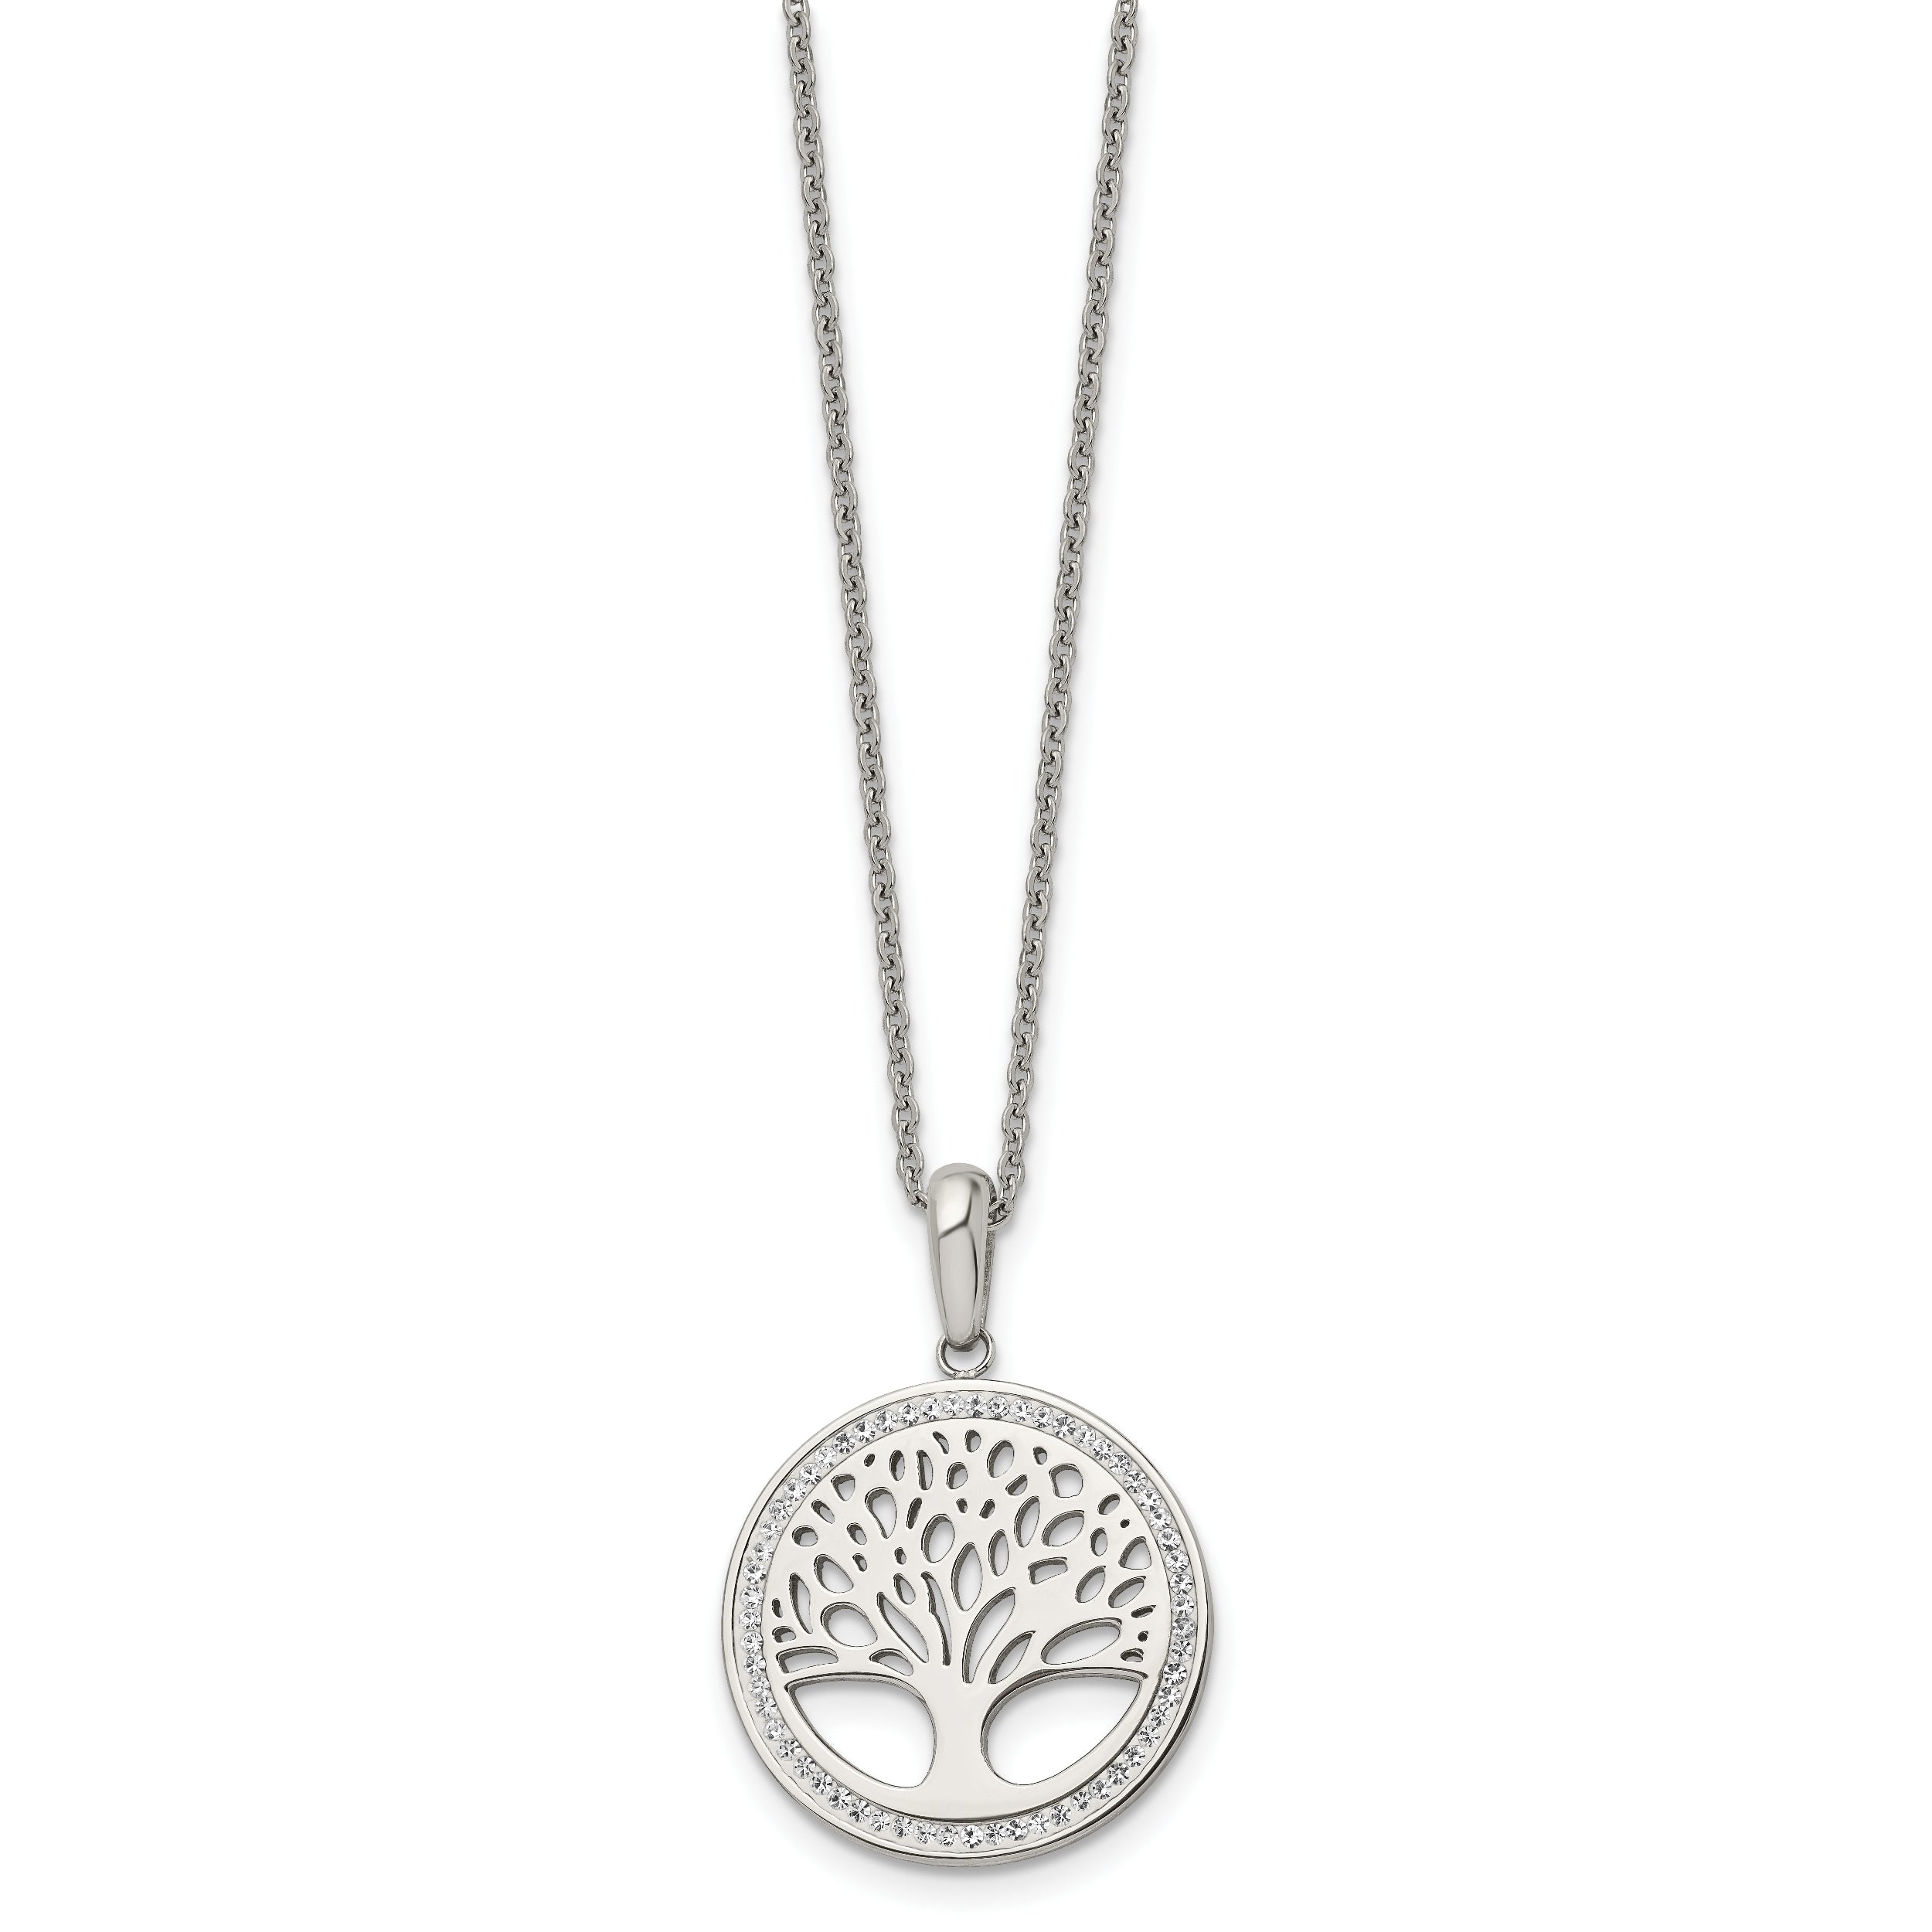 Chisel Stainless Steel Polished with Preciosa Crystal Tree of Life Pendant on a 16 inch Cable Chain with 2 inch Extension Necklace